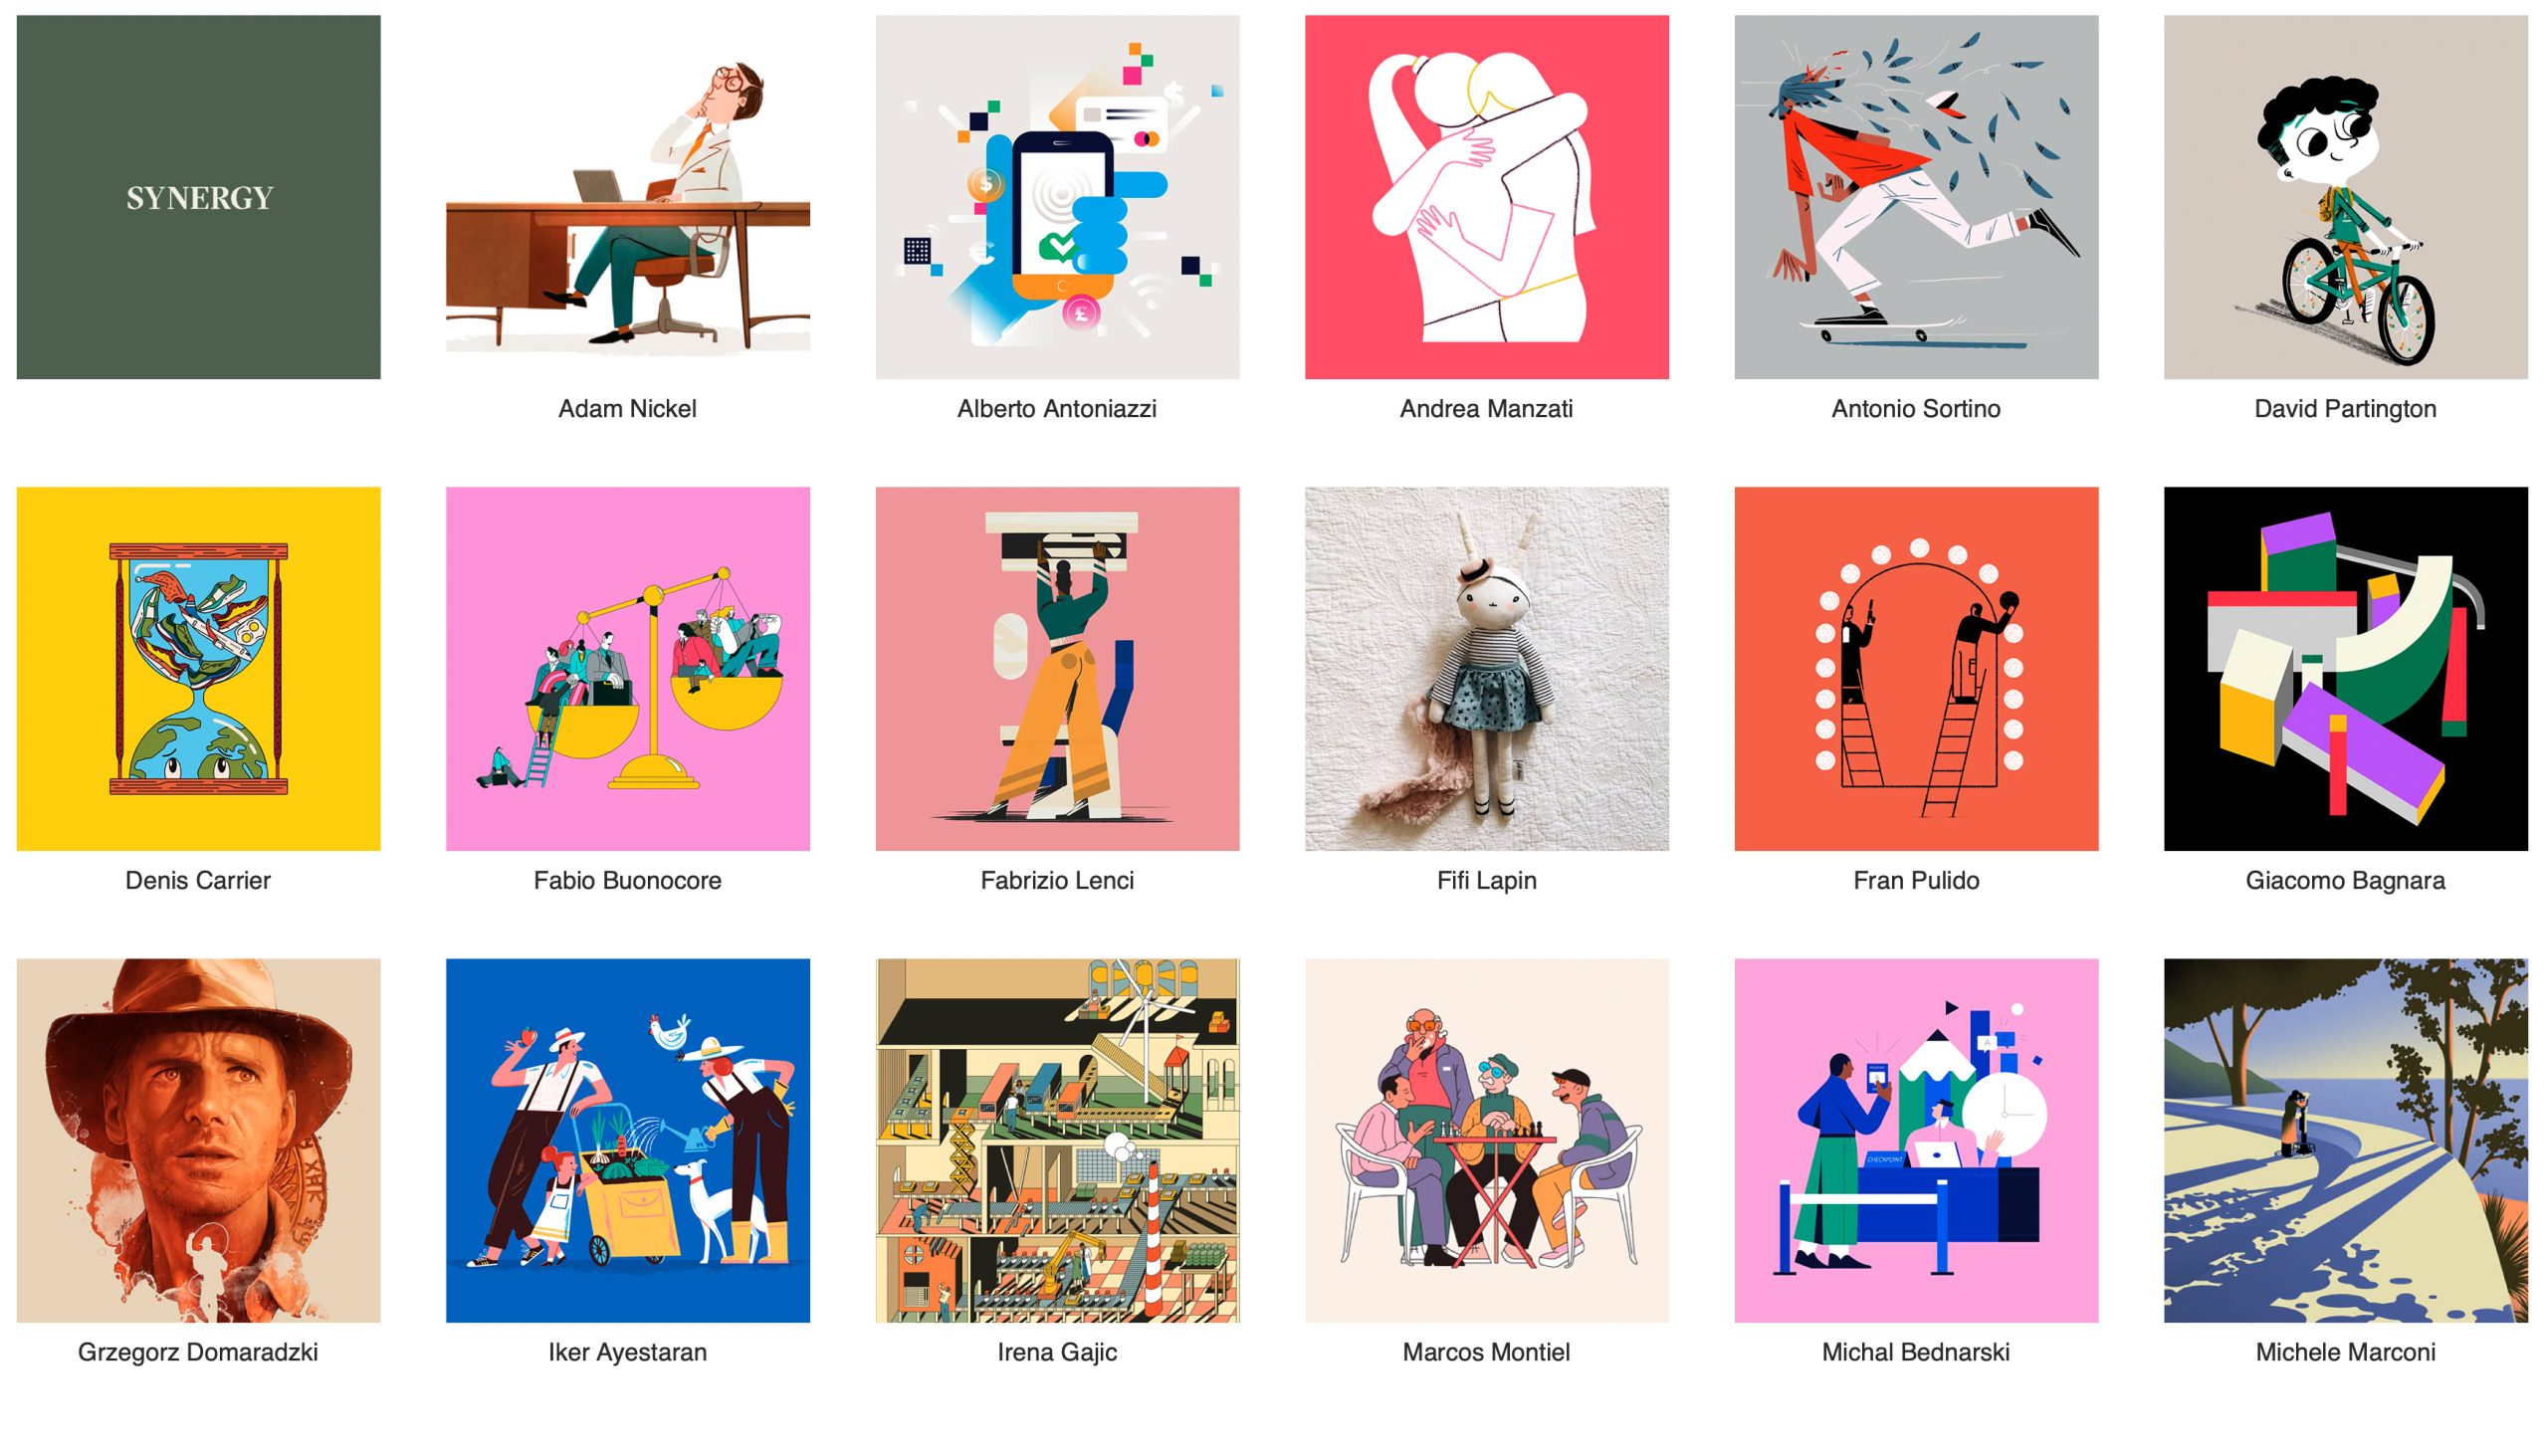 Synergy is an illustration agency in GB